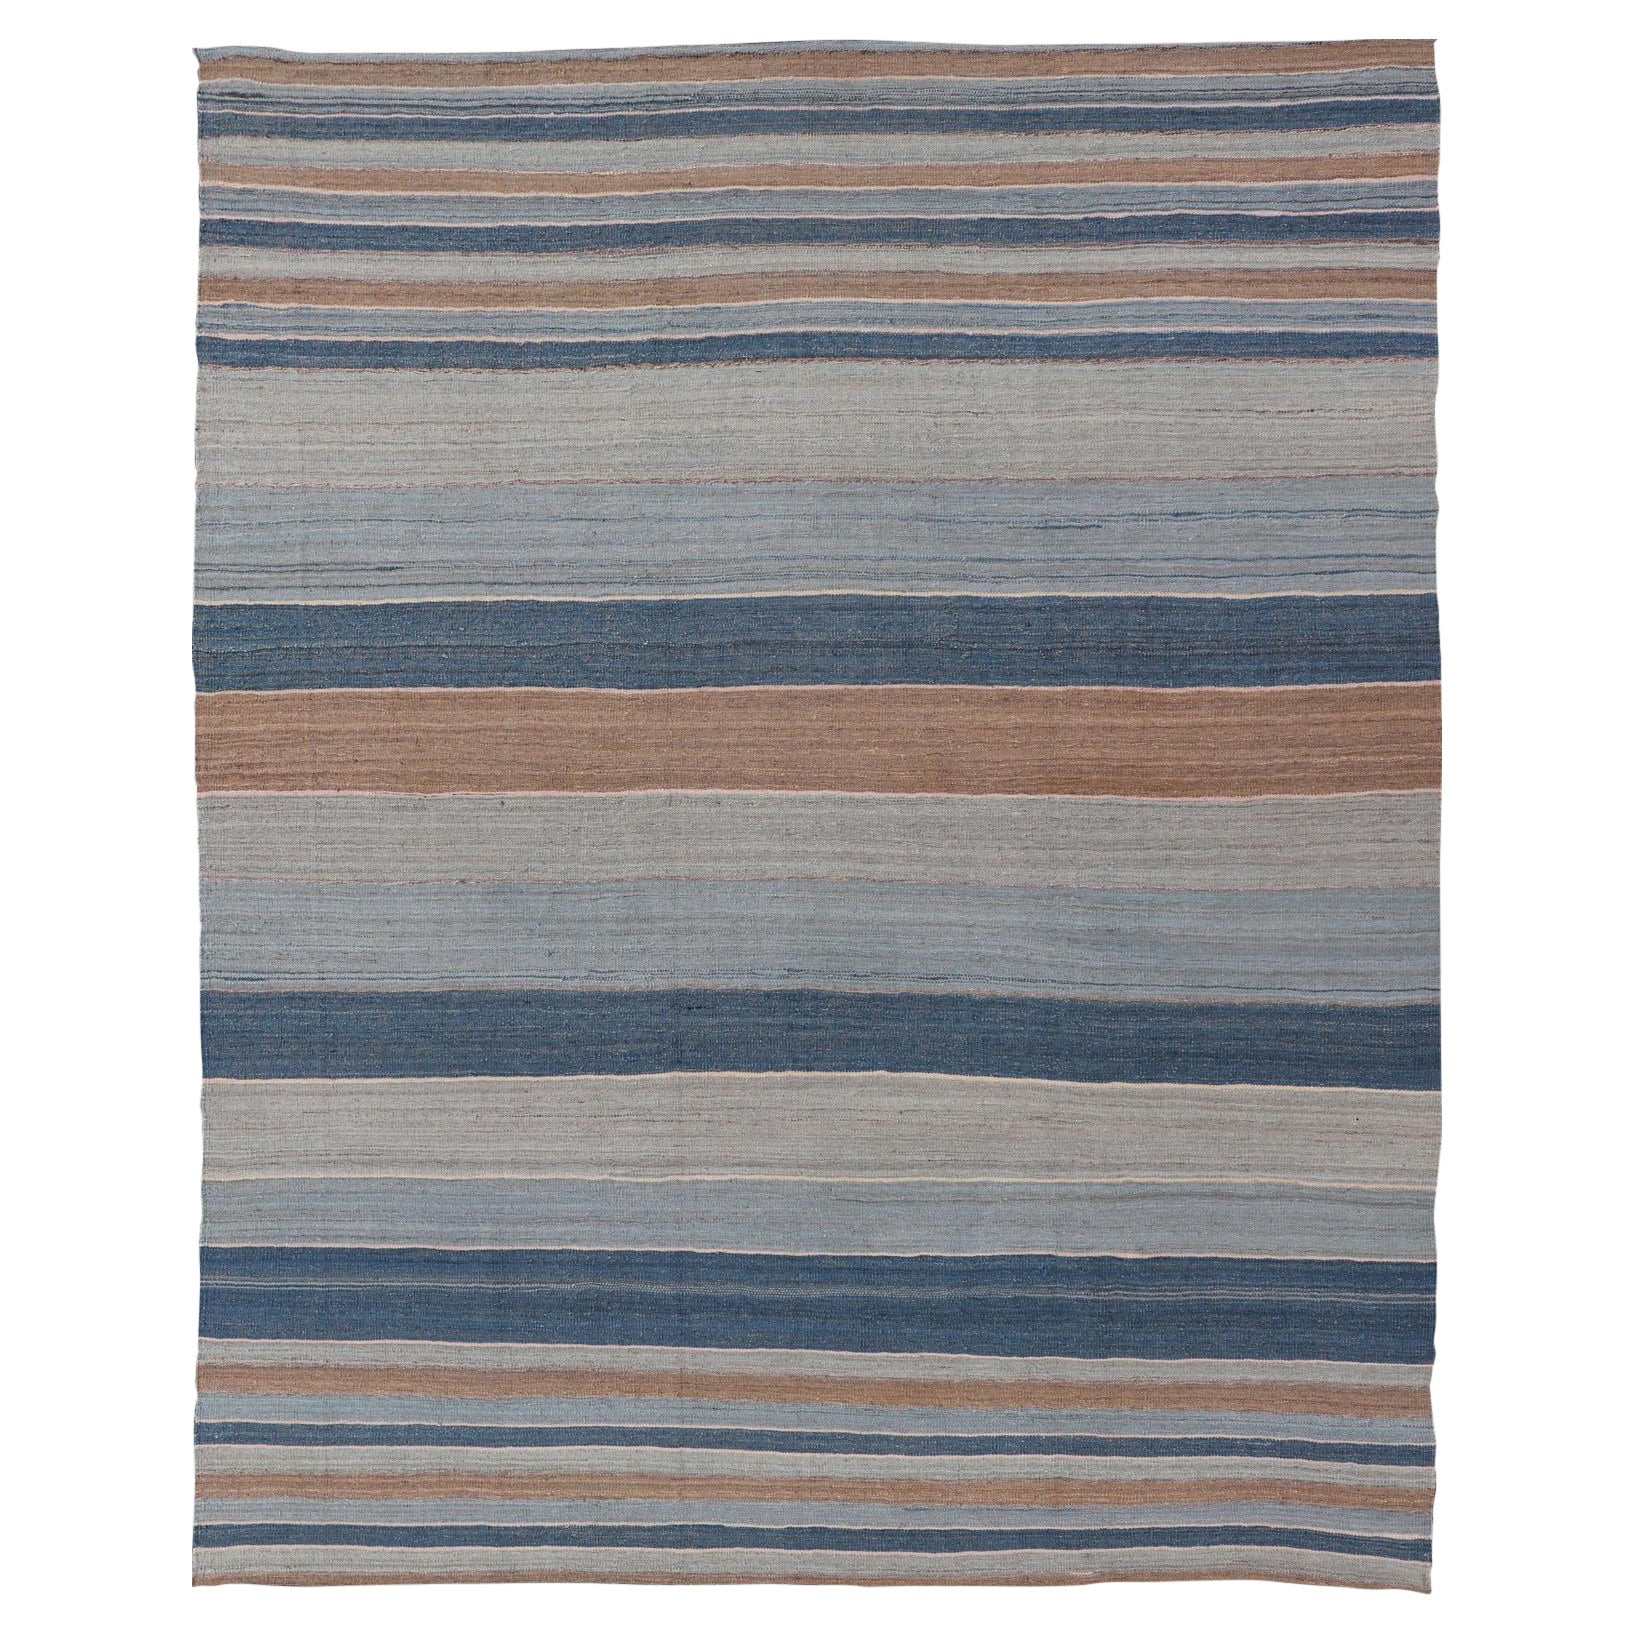 Modern Kilim Rug with Large Stripes in Shades of Blues, Brown, Gray